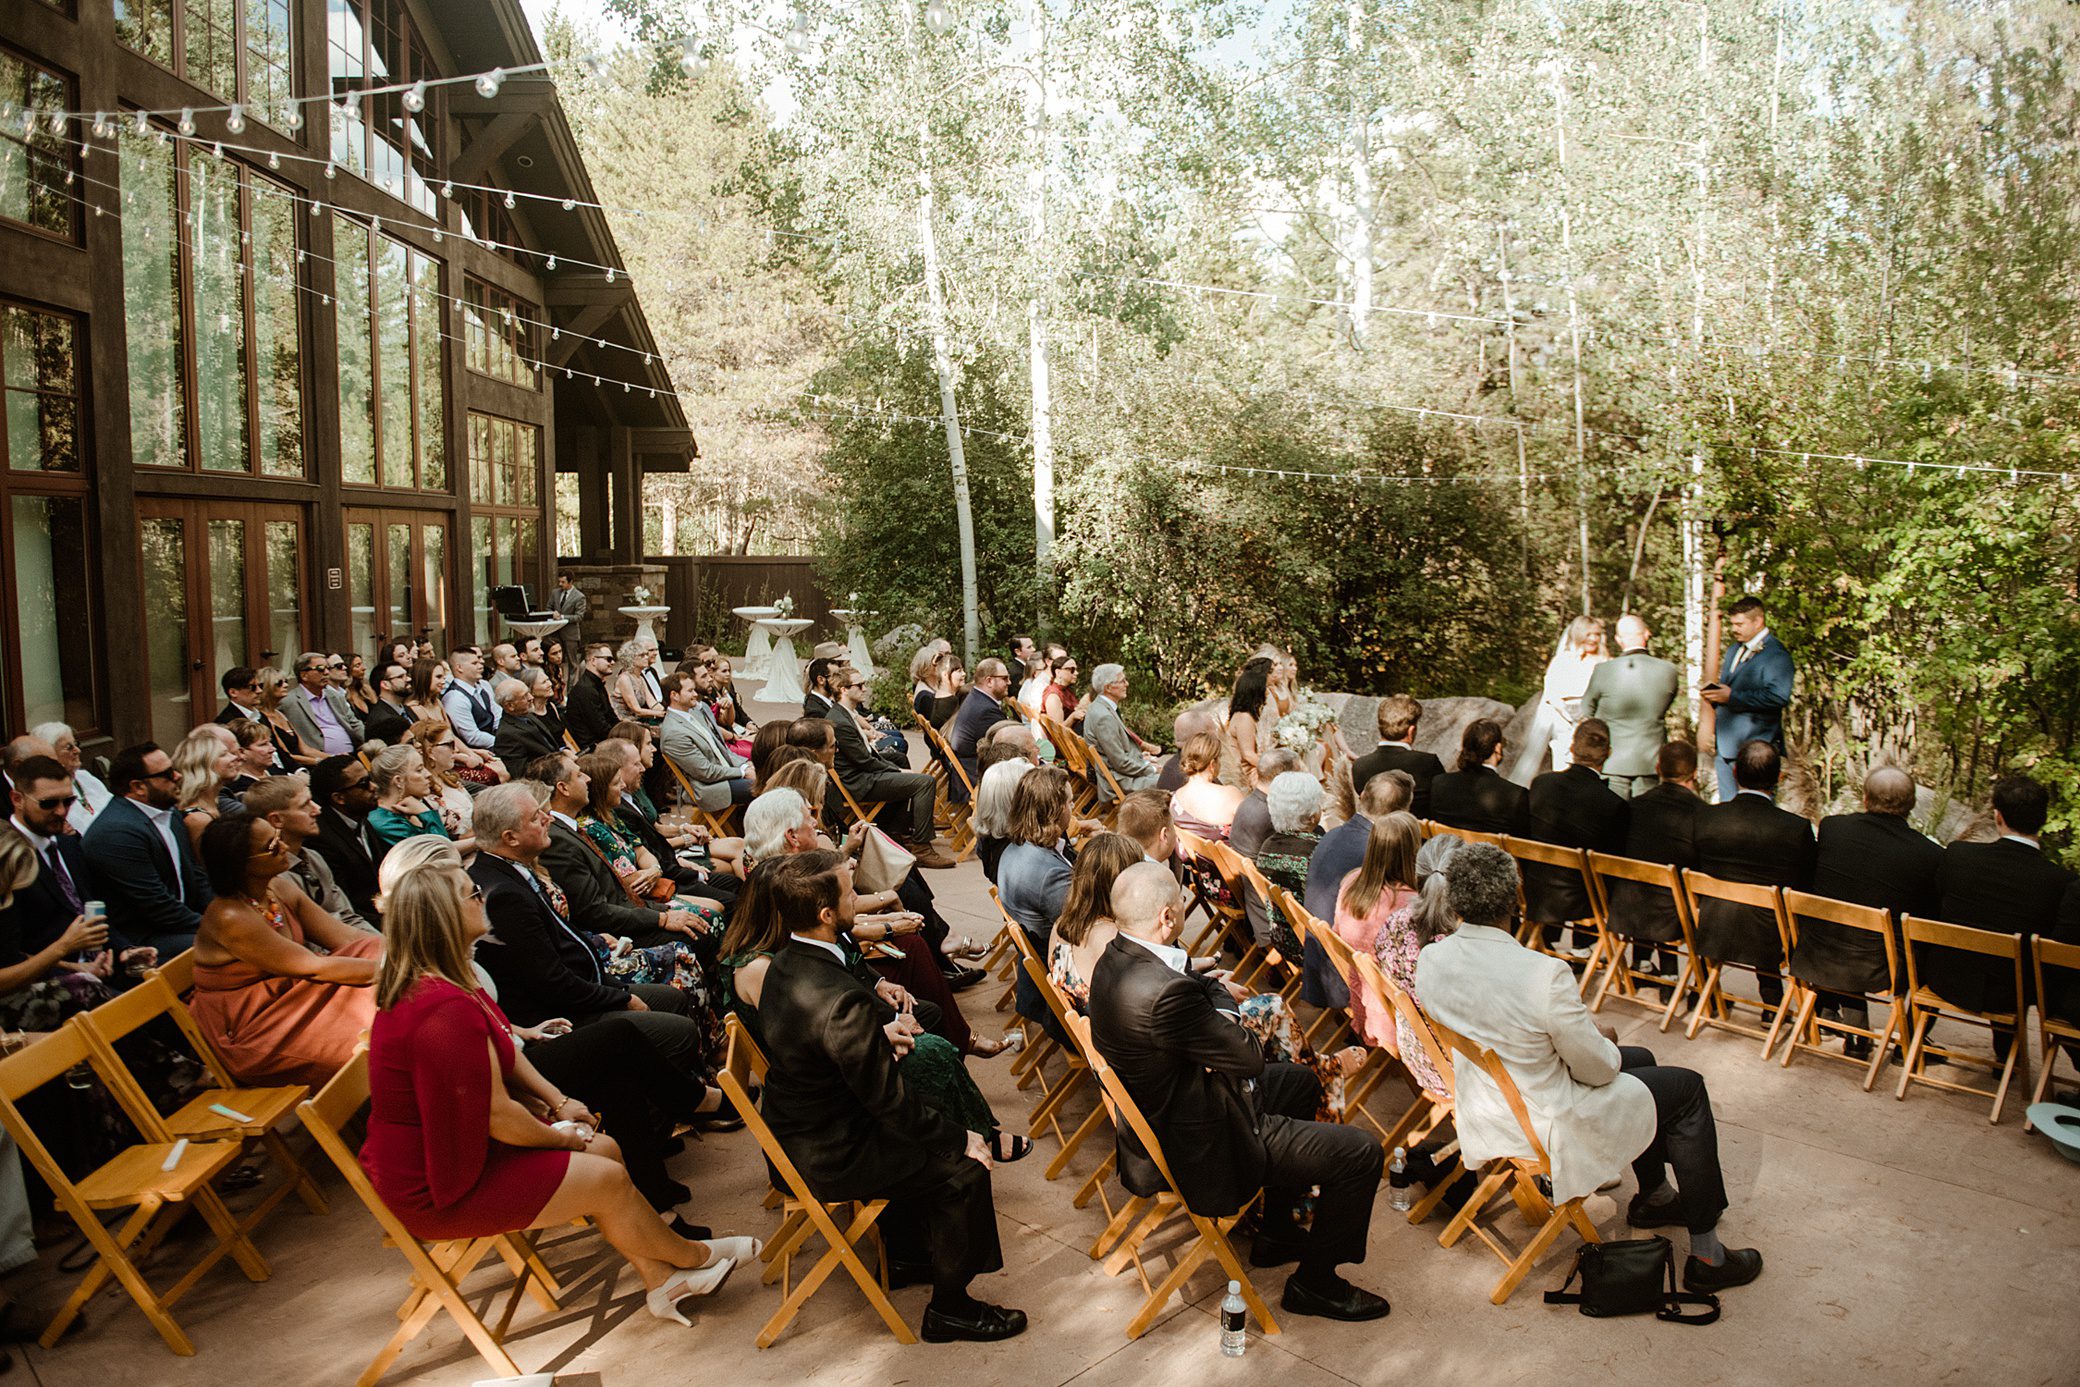 A wedding ceremony held in the patio of the Donovan Pavilion in Vail, Colorado